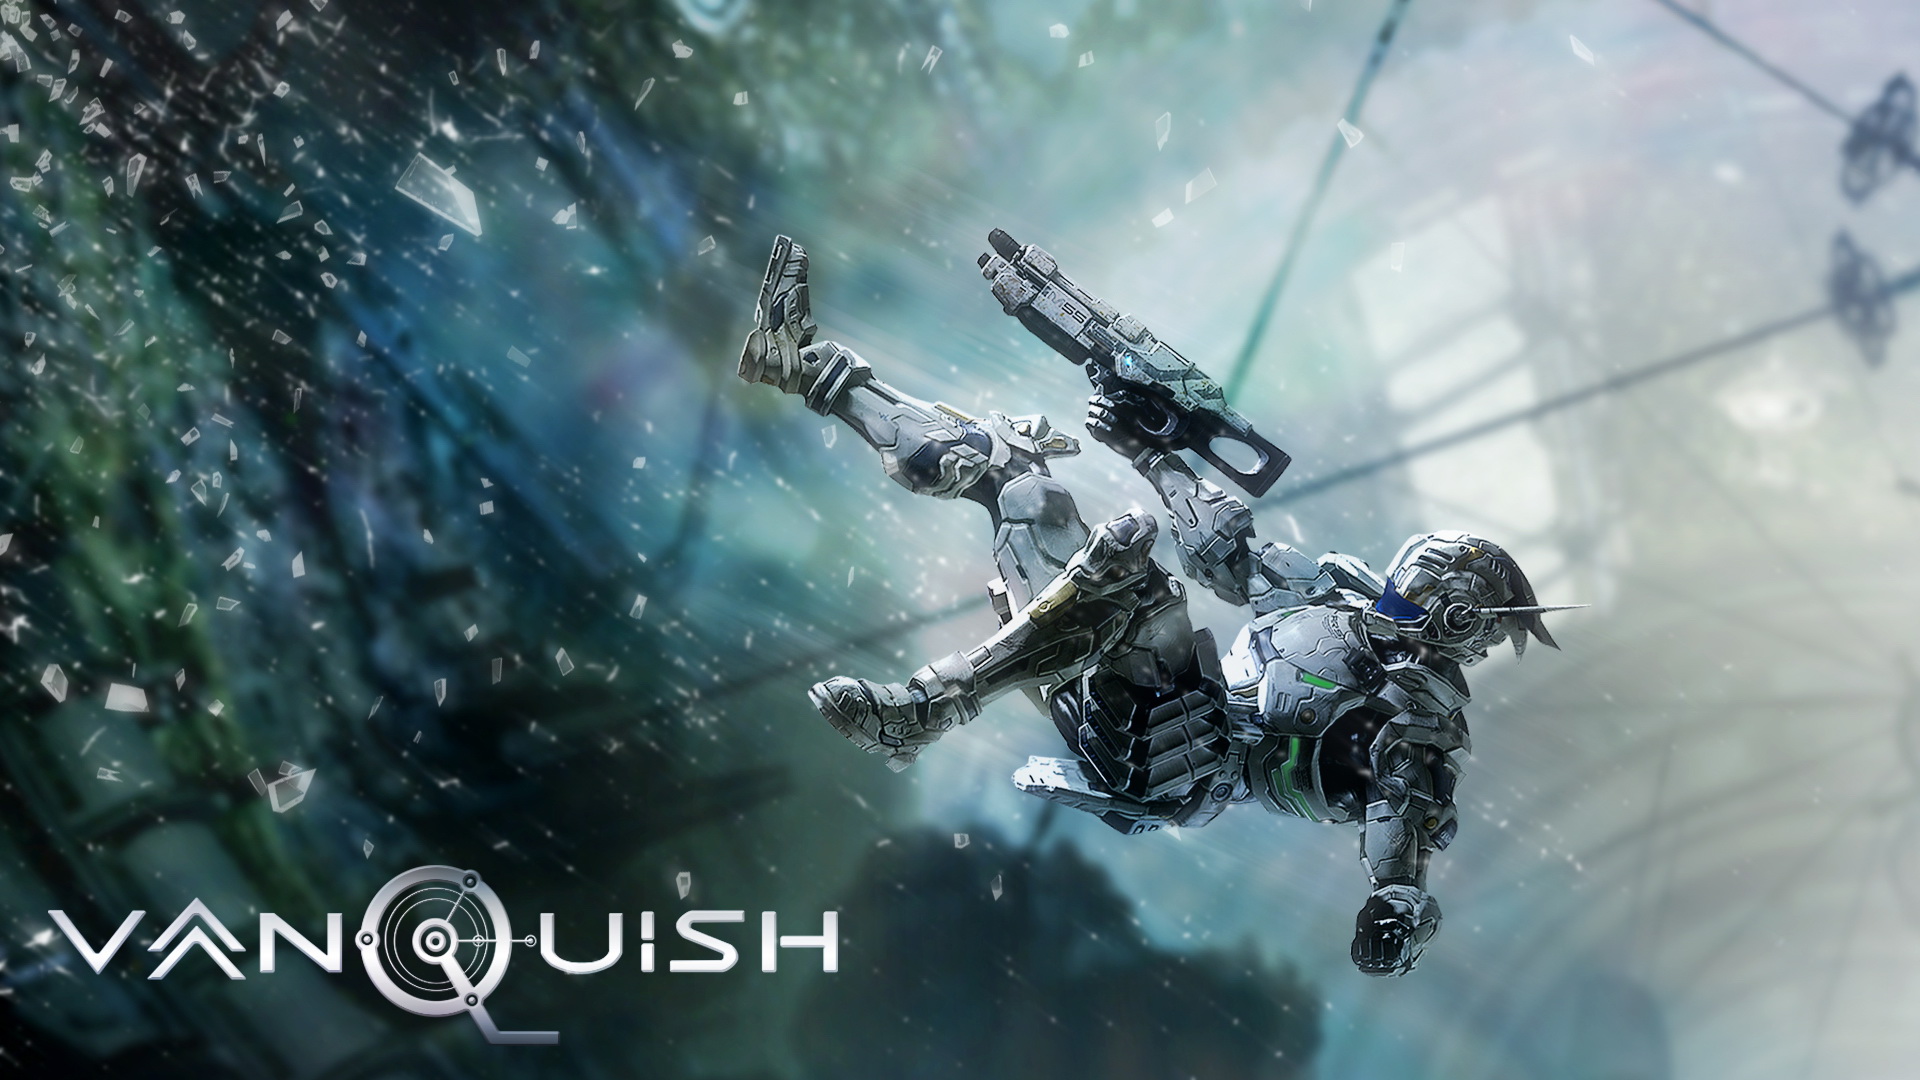 video game, vanquish wallpaper for mobile